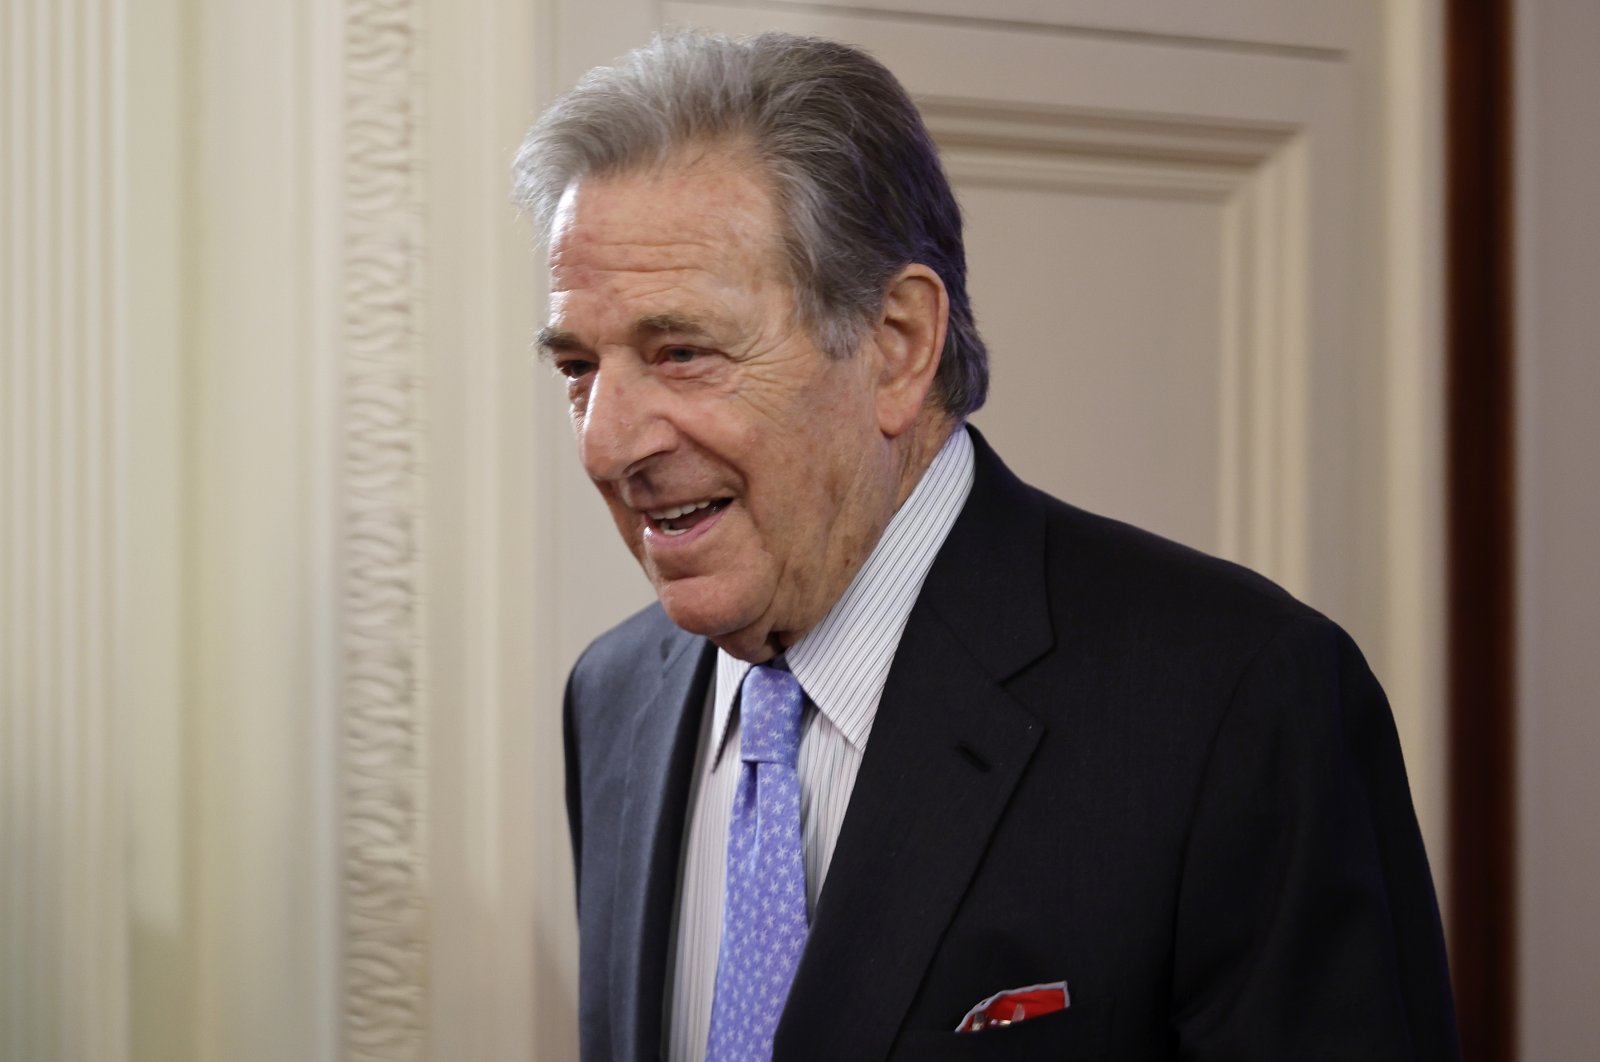 Paul Pelosi, husband of U.S. House Speaker Nancy Pelosi (D-CA), arrives for a reception honoring Greek Prime Minister Kyriakos Mitsotakis and his wife Mareva Mitsotakis in the East Room of the White House, Washington, D.C., May 16, 2022. (Getty Images Photo)